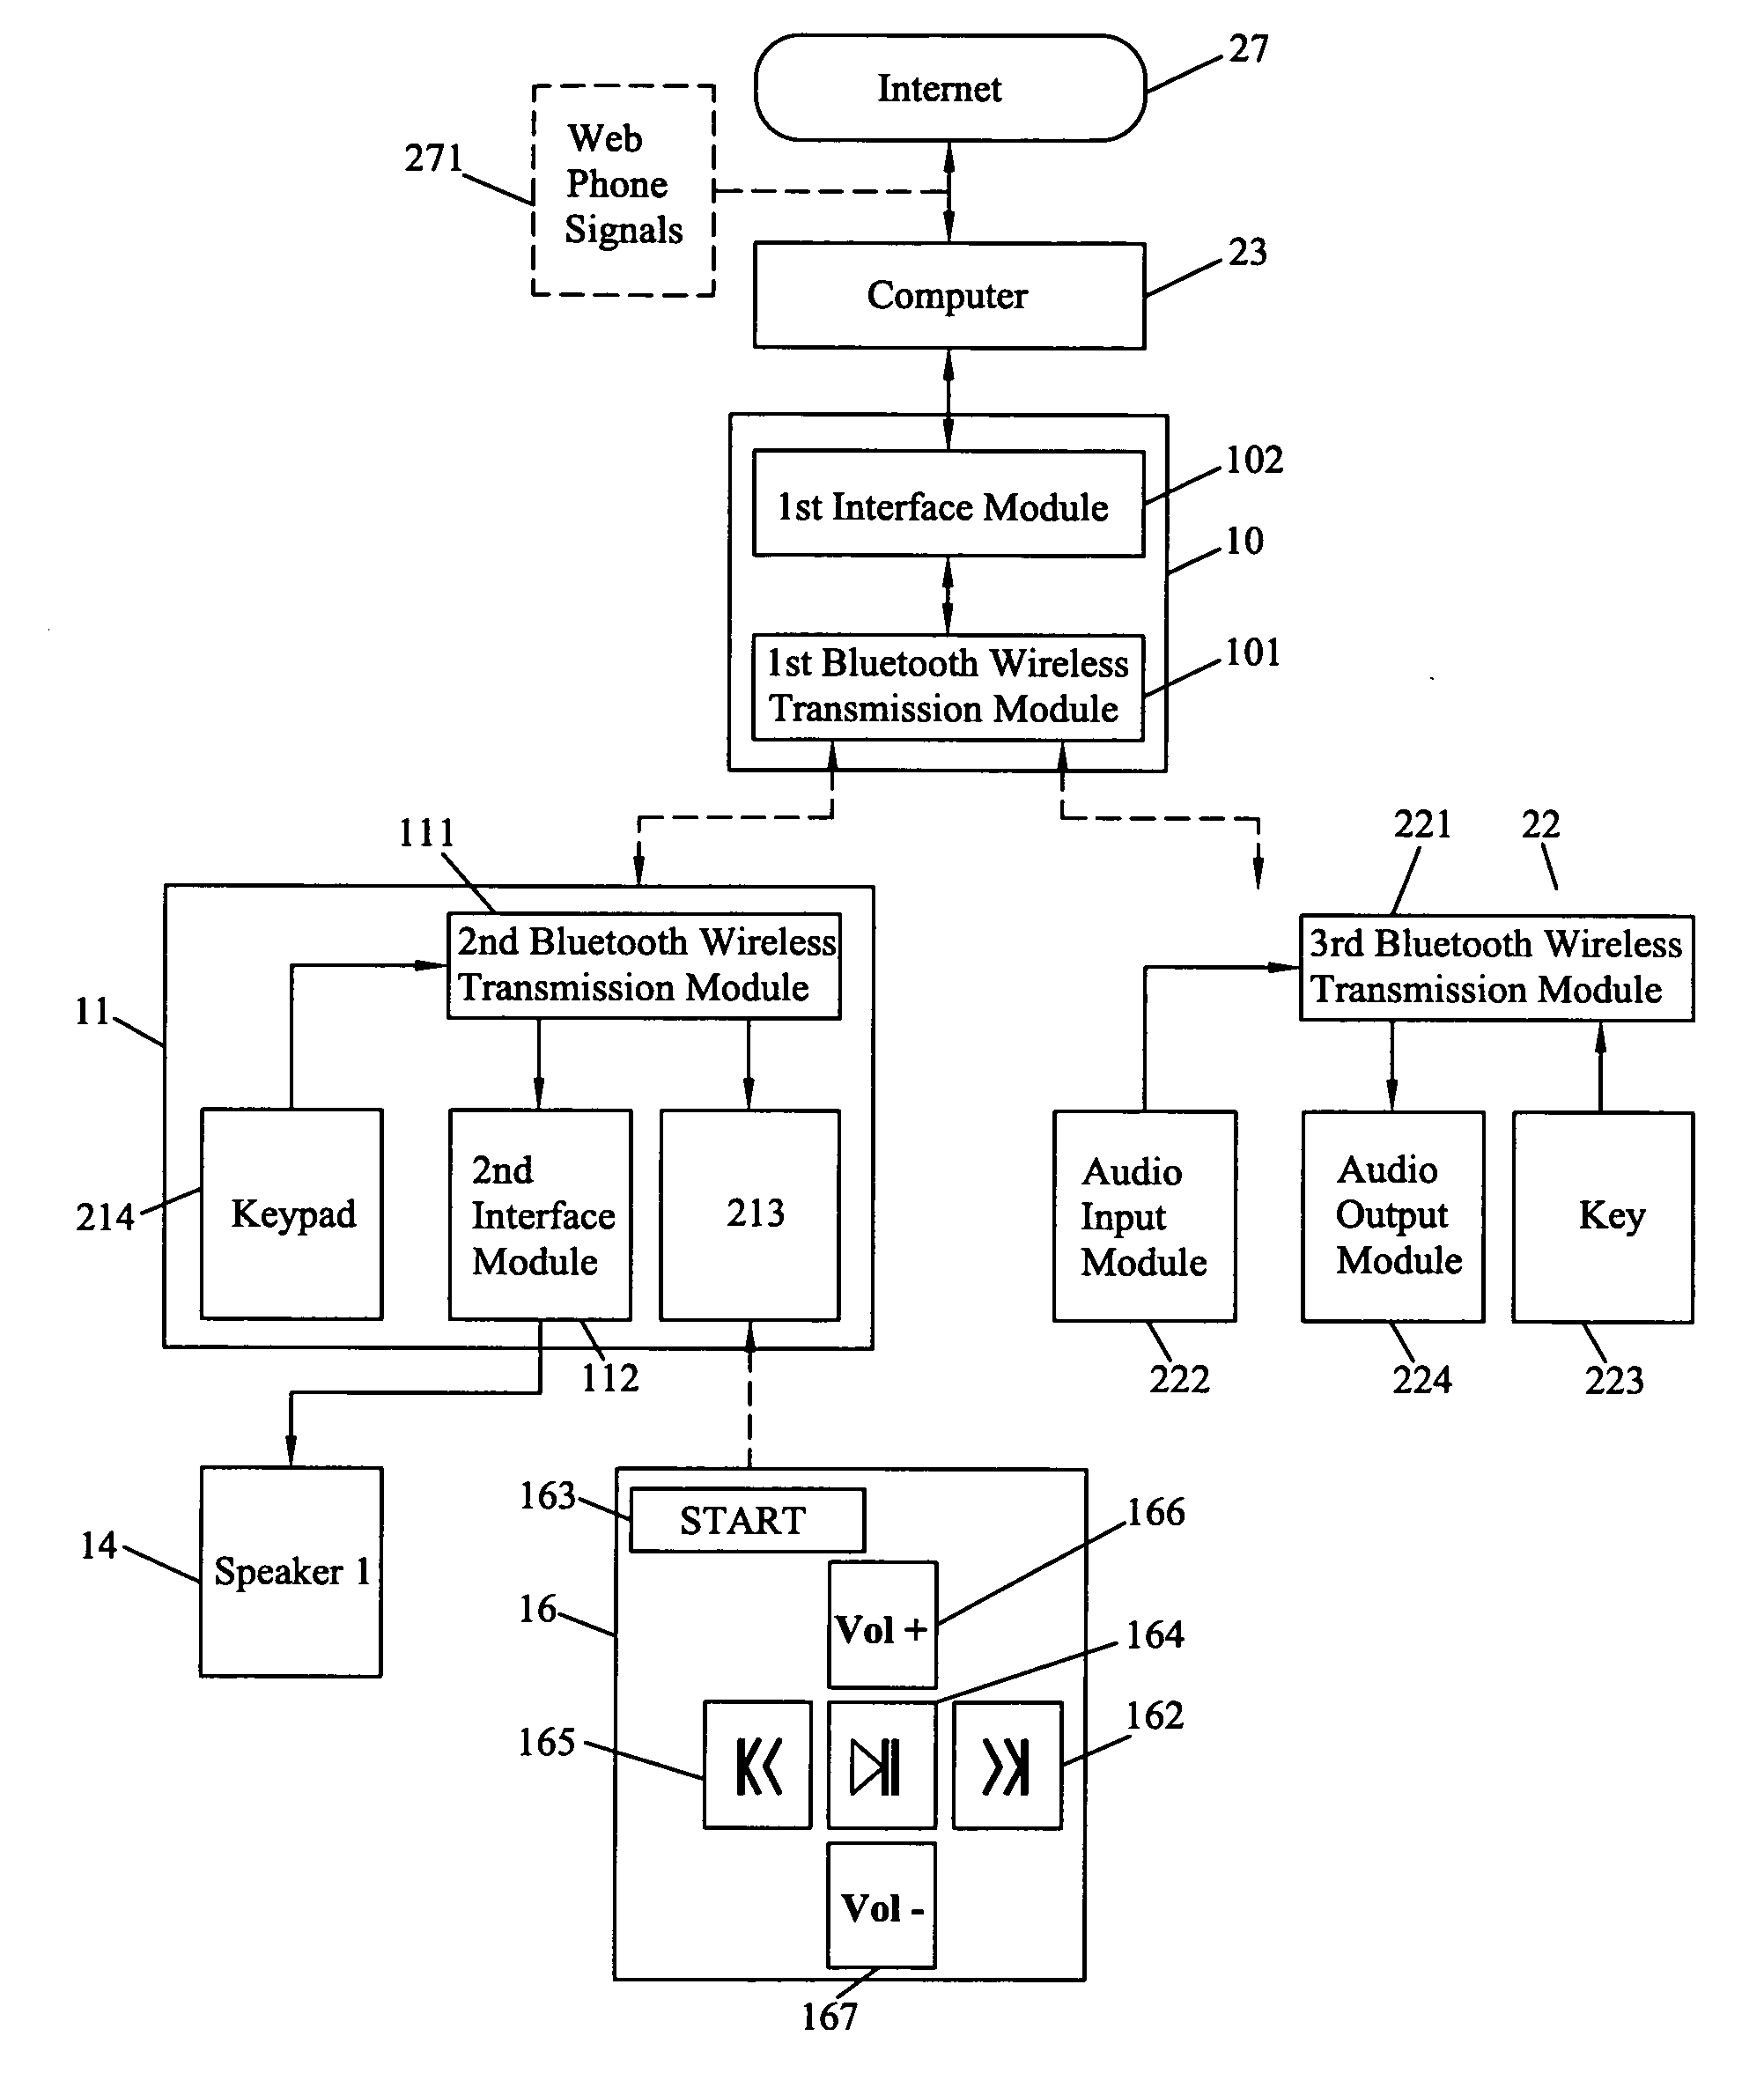 Multimedia switching system